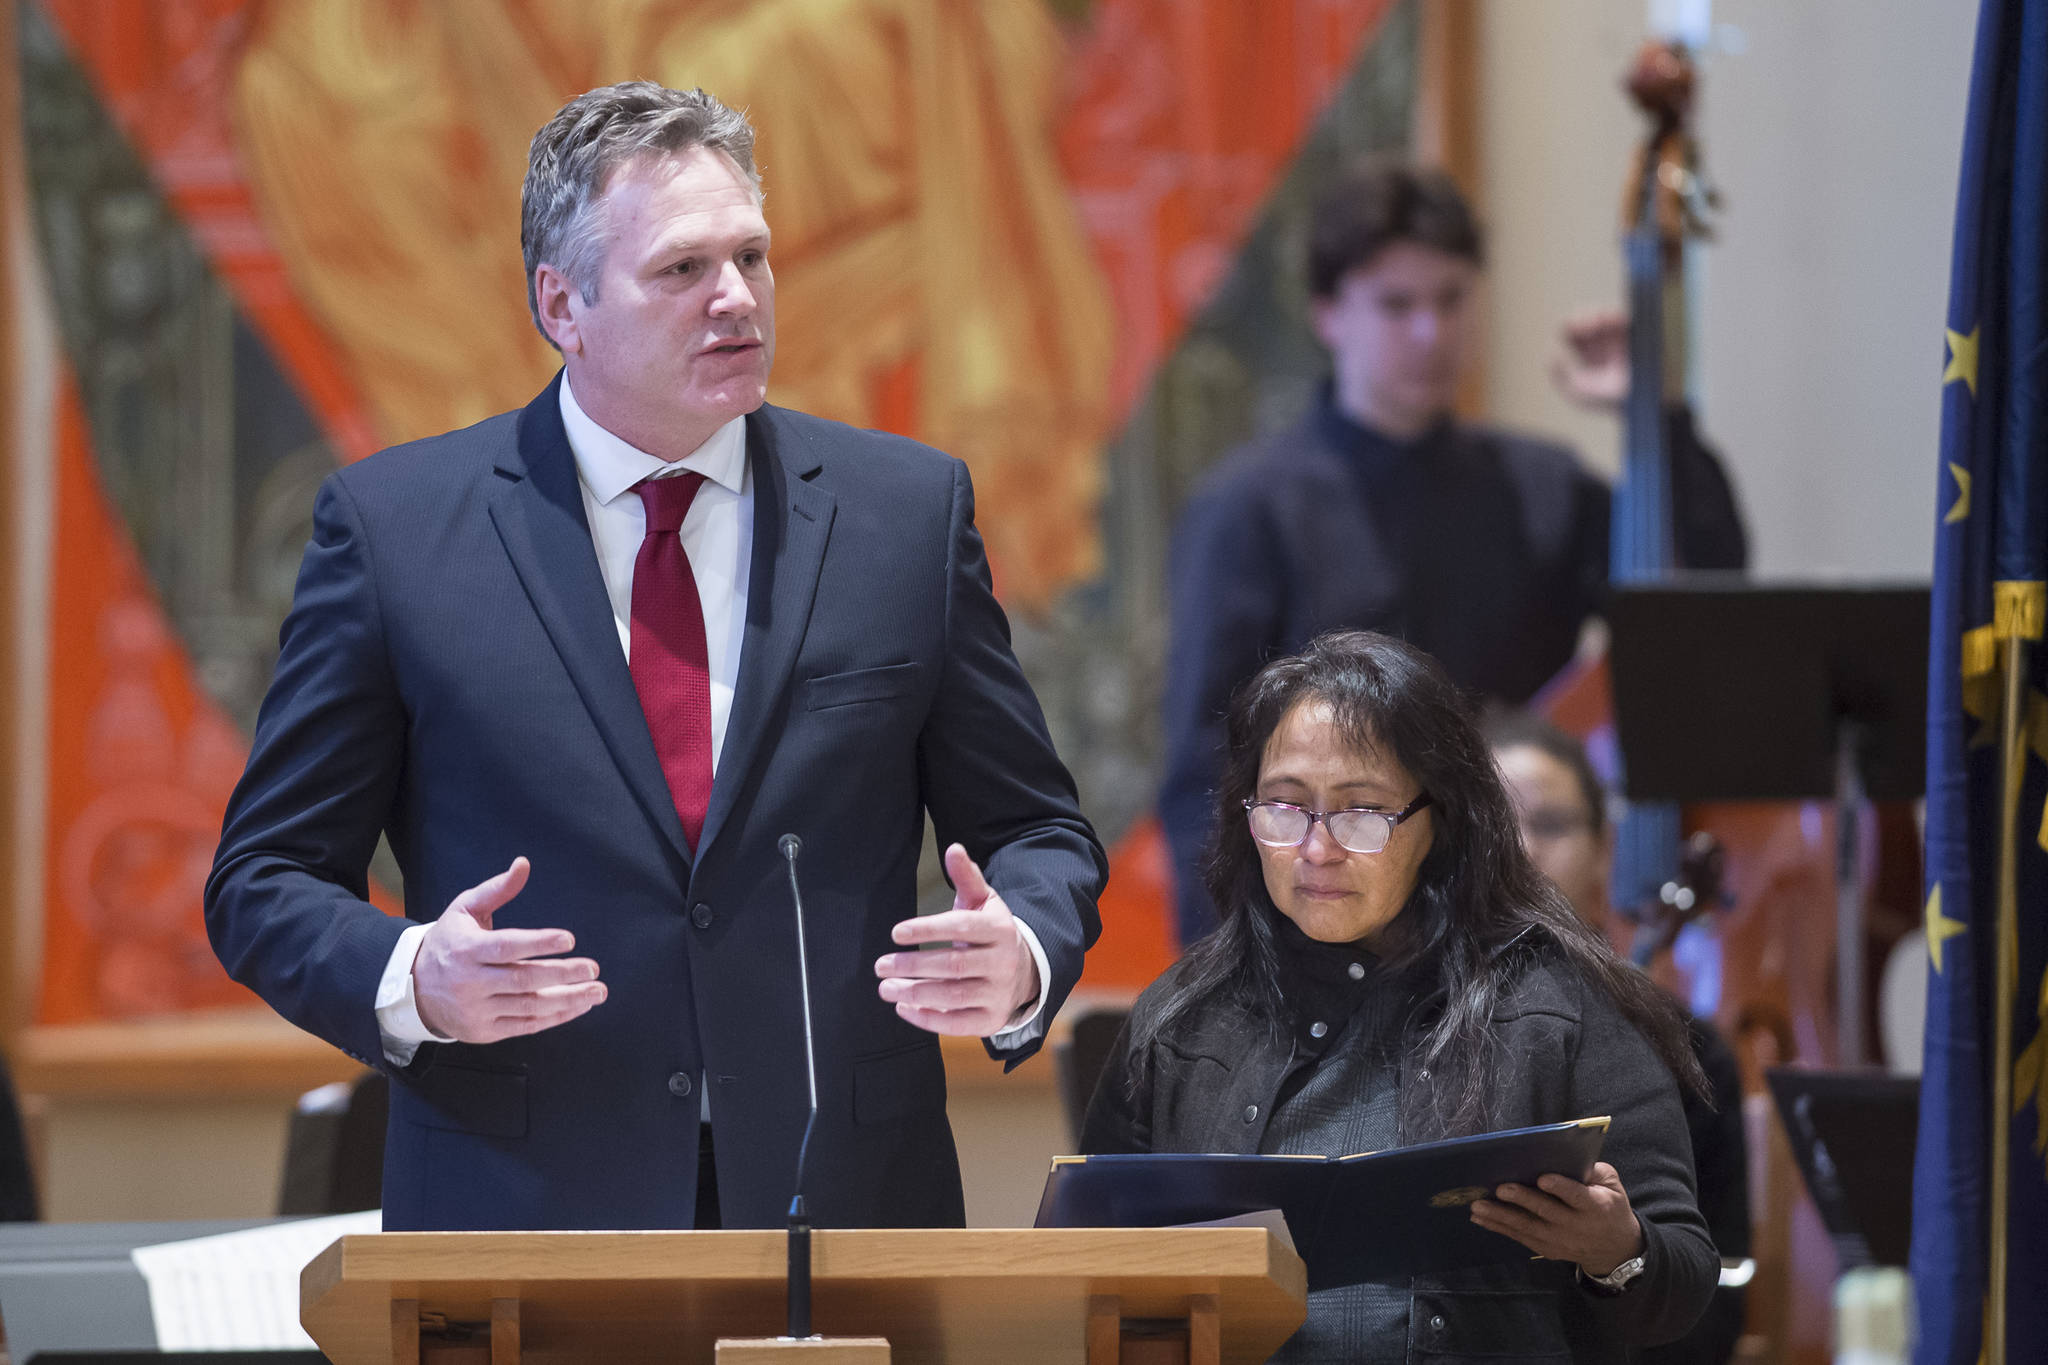 Gov. Michael J. Dunleavy, with his wife, Rose, anounces the proclamation of Dr. Martin Luther King Jr. Day at the Dr. Martin Luther King Jr. 2019 Community Celebration at St. Paul’s Catholic Church on Monday, Jan. 21, 2019. (Michael Penn | Juneau Empire)